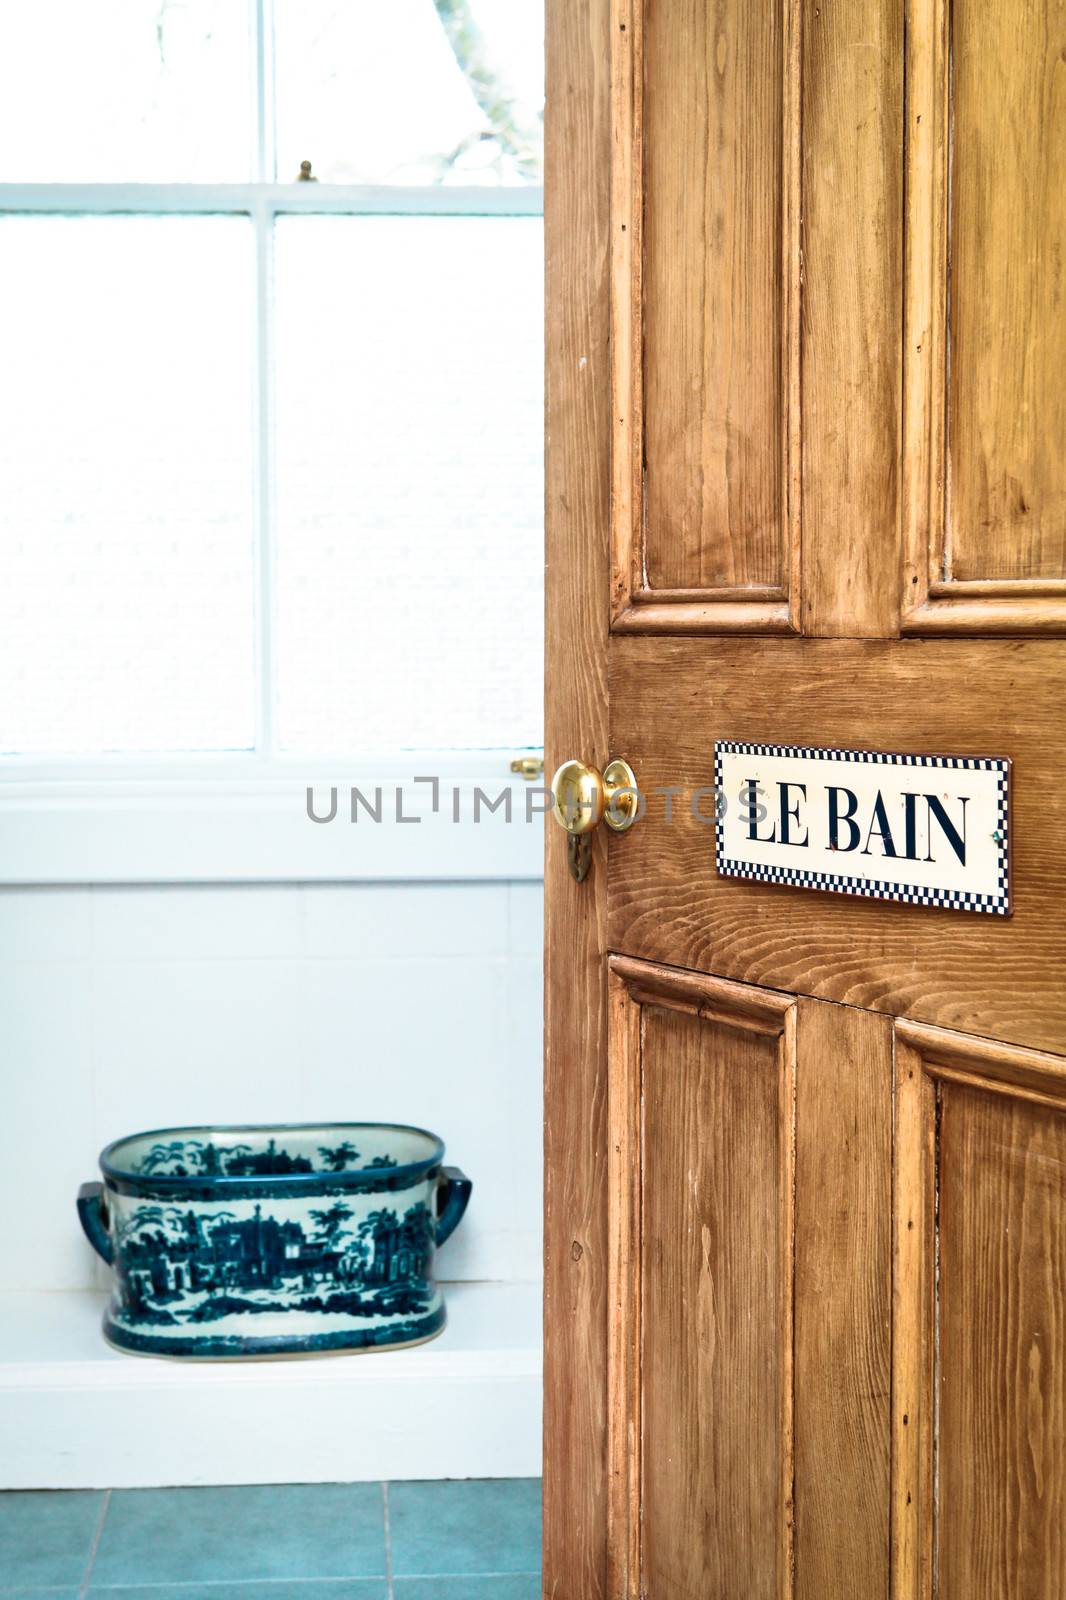 Bathroom door with French sign and vintage features